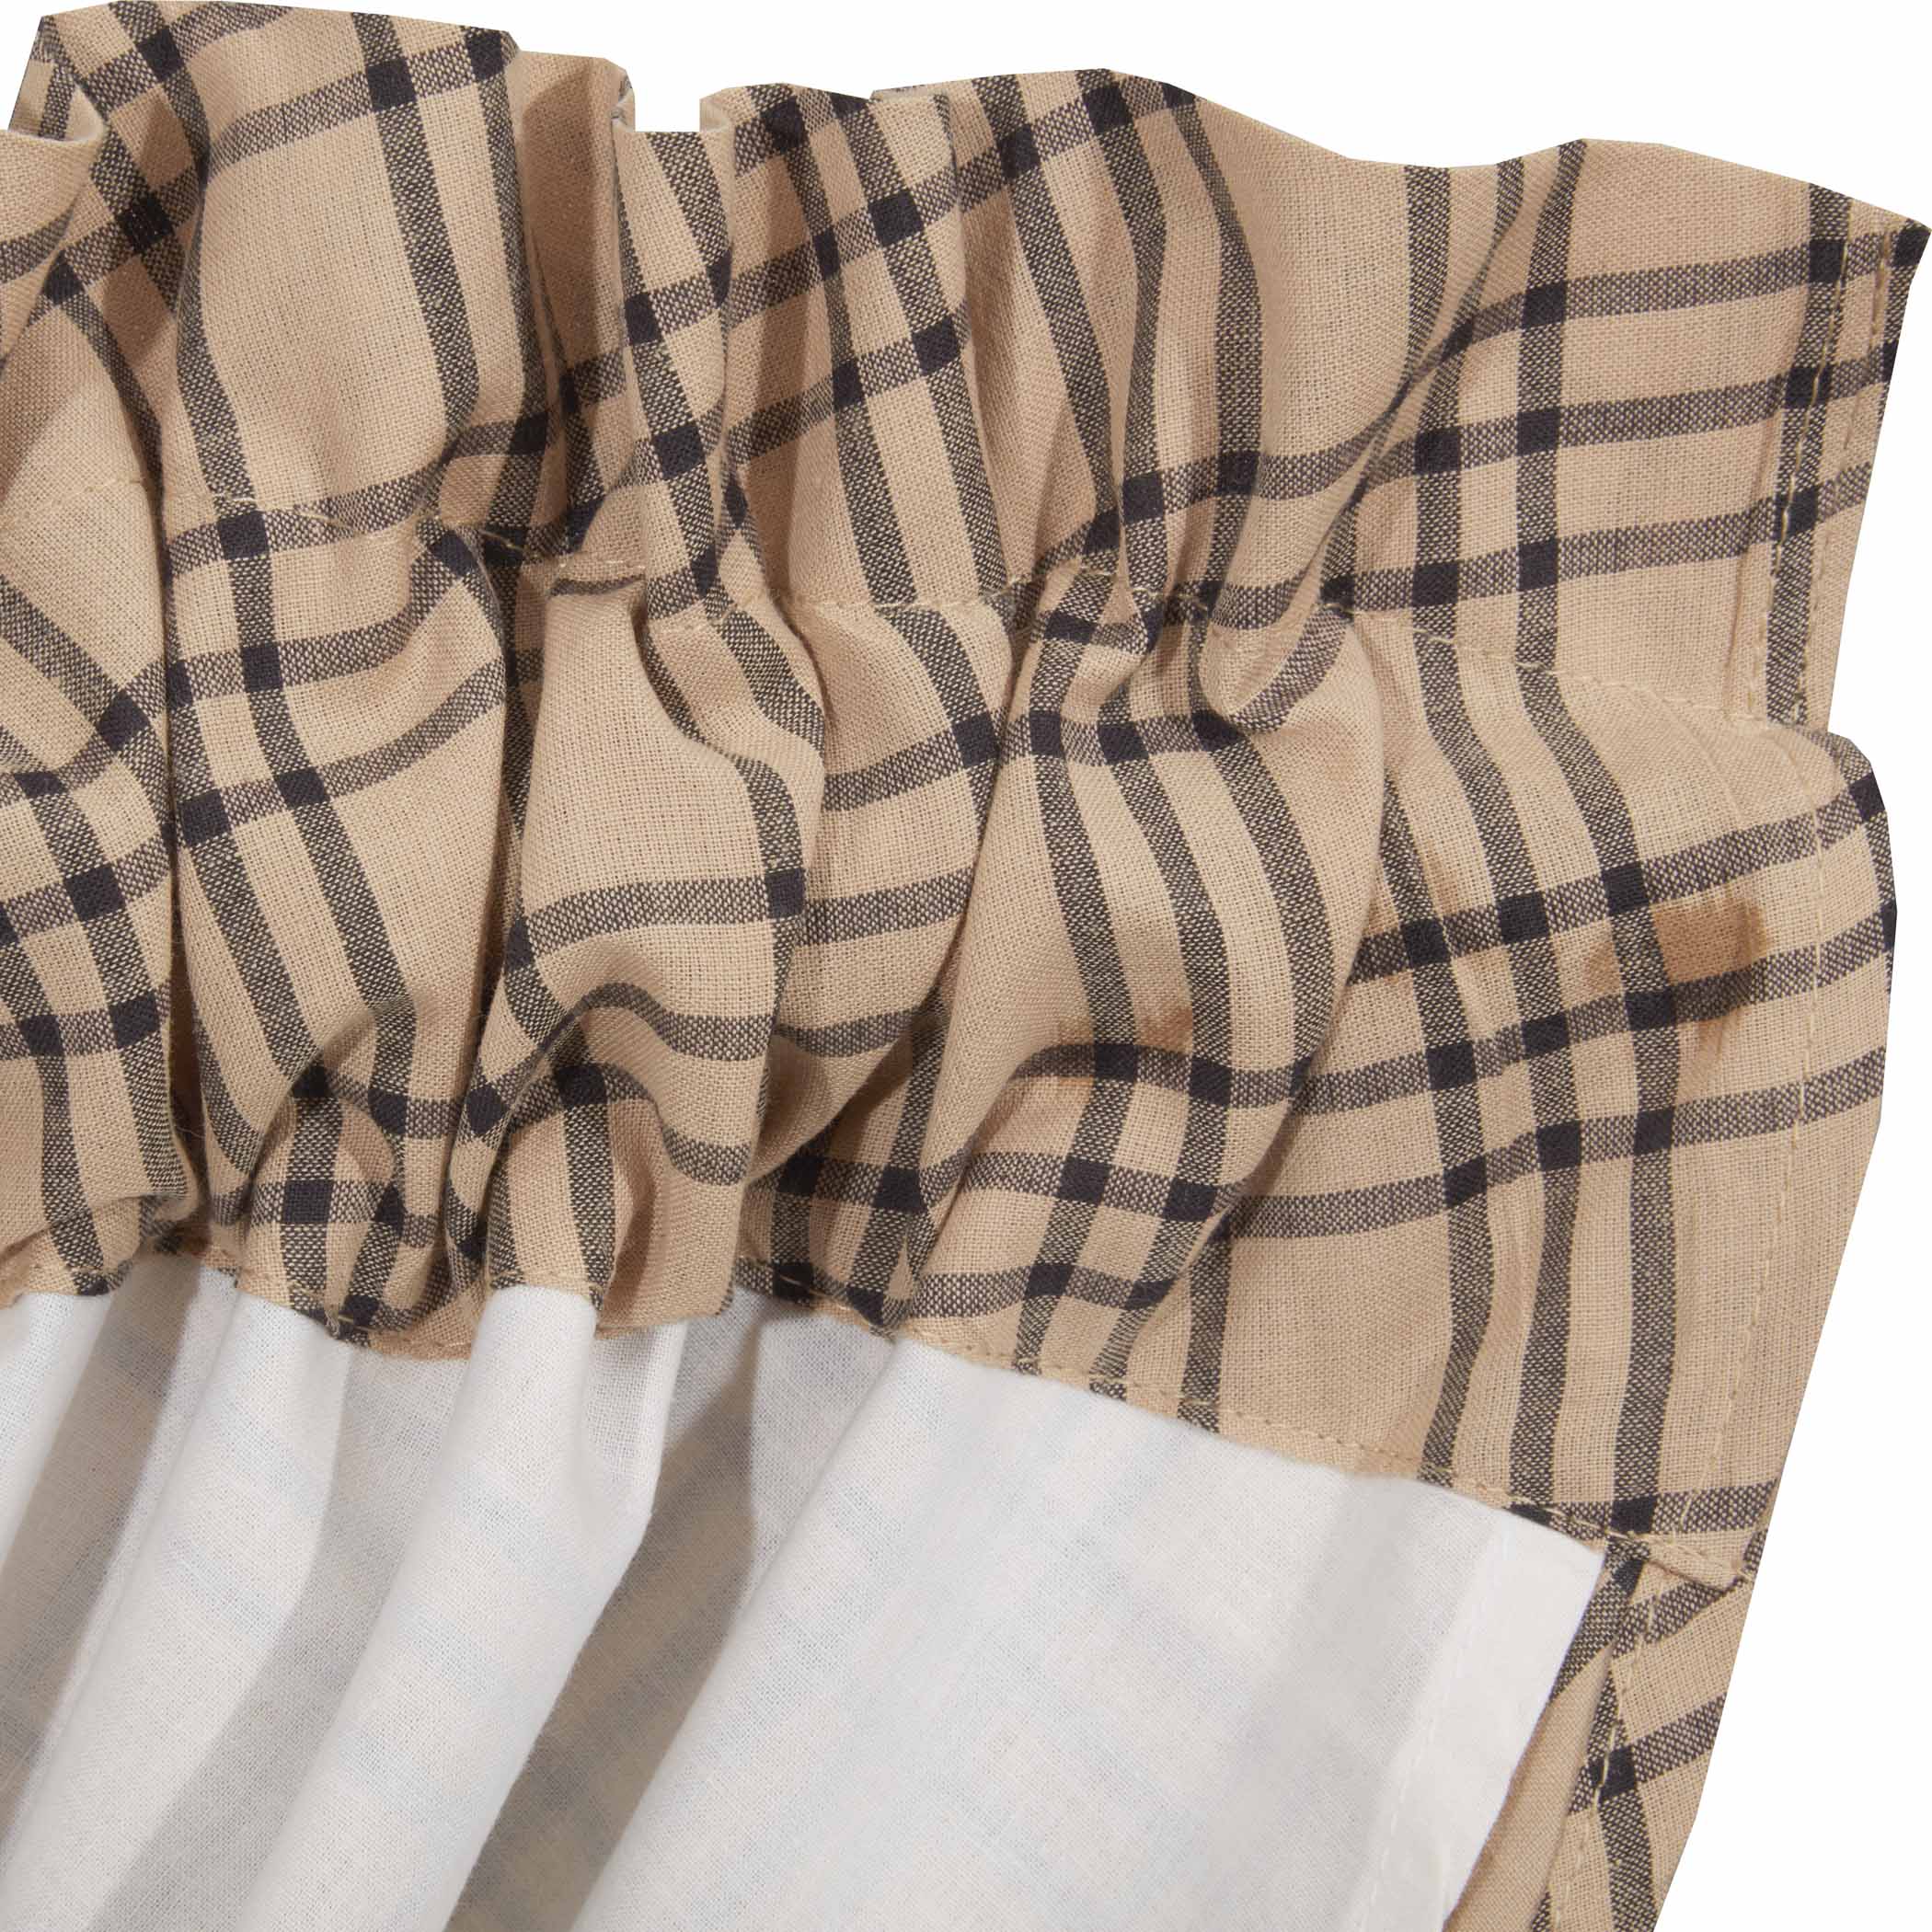 Sawyer Mill Charcoal Plaid Balloon Valance Curtain VHC Brands